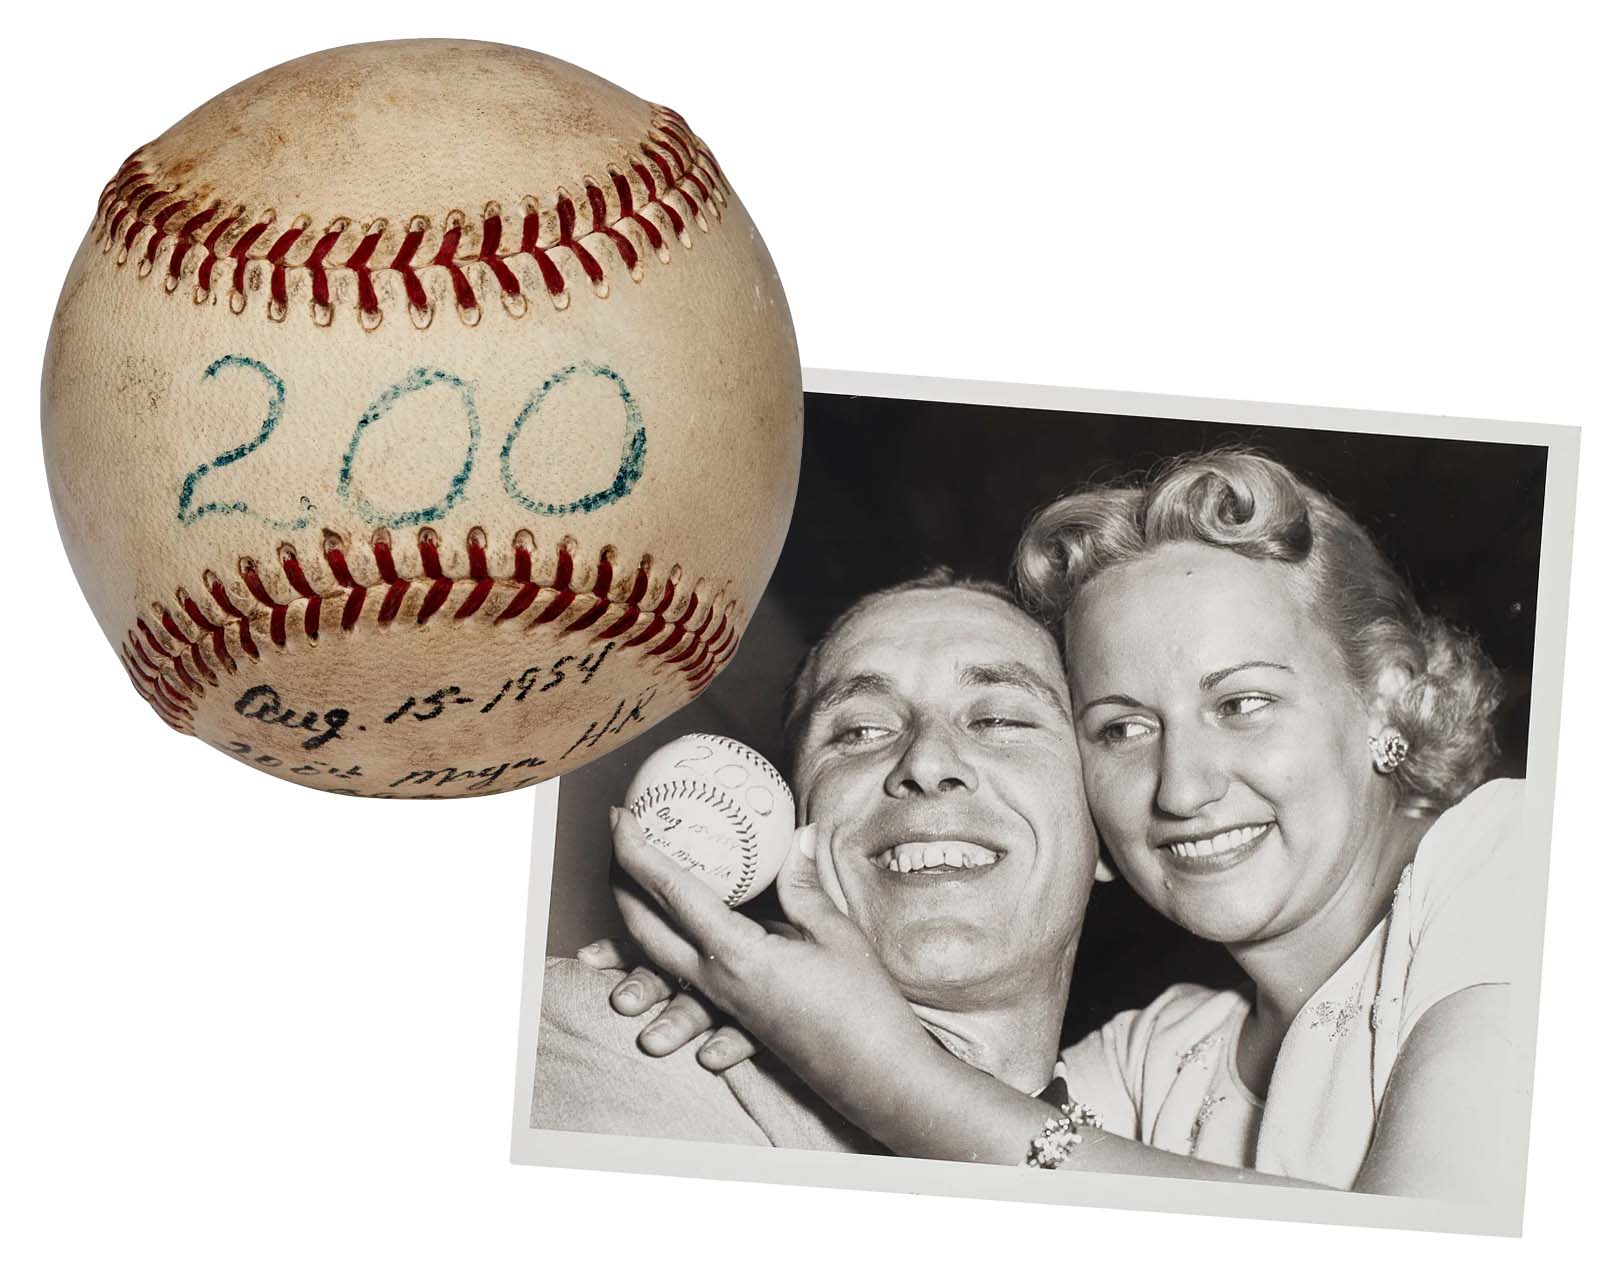 Los Angeles Dodgers' Gil Hodges 200th career home run ball, $4,000-$6,000 at Christie's.